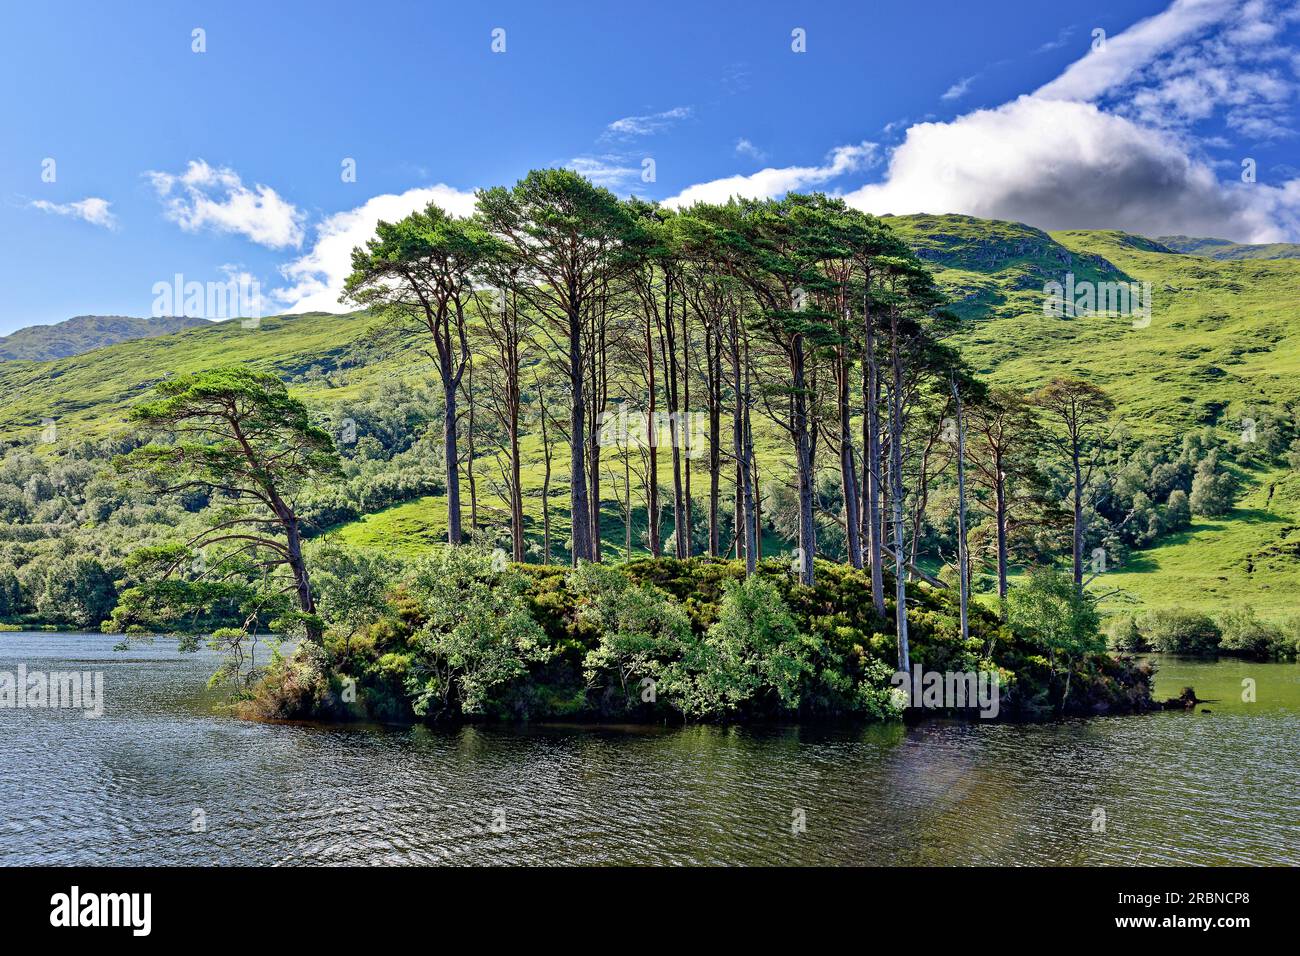 Dumbledore's Grave Lochailort Scotland a small island with Scots Pine Trees at the West end of the Loch Eilt Stock Photo